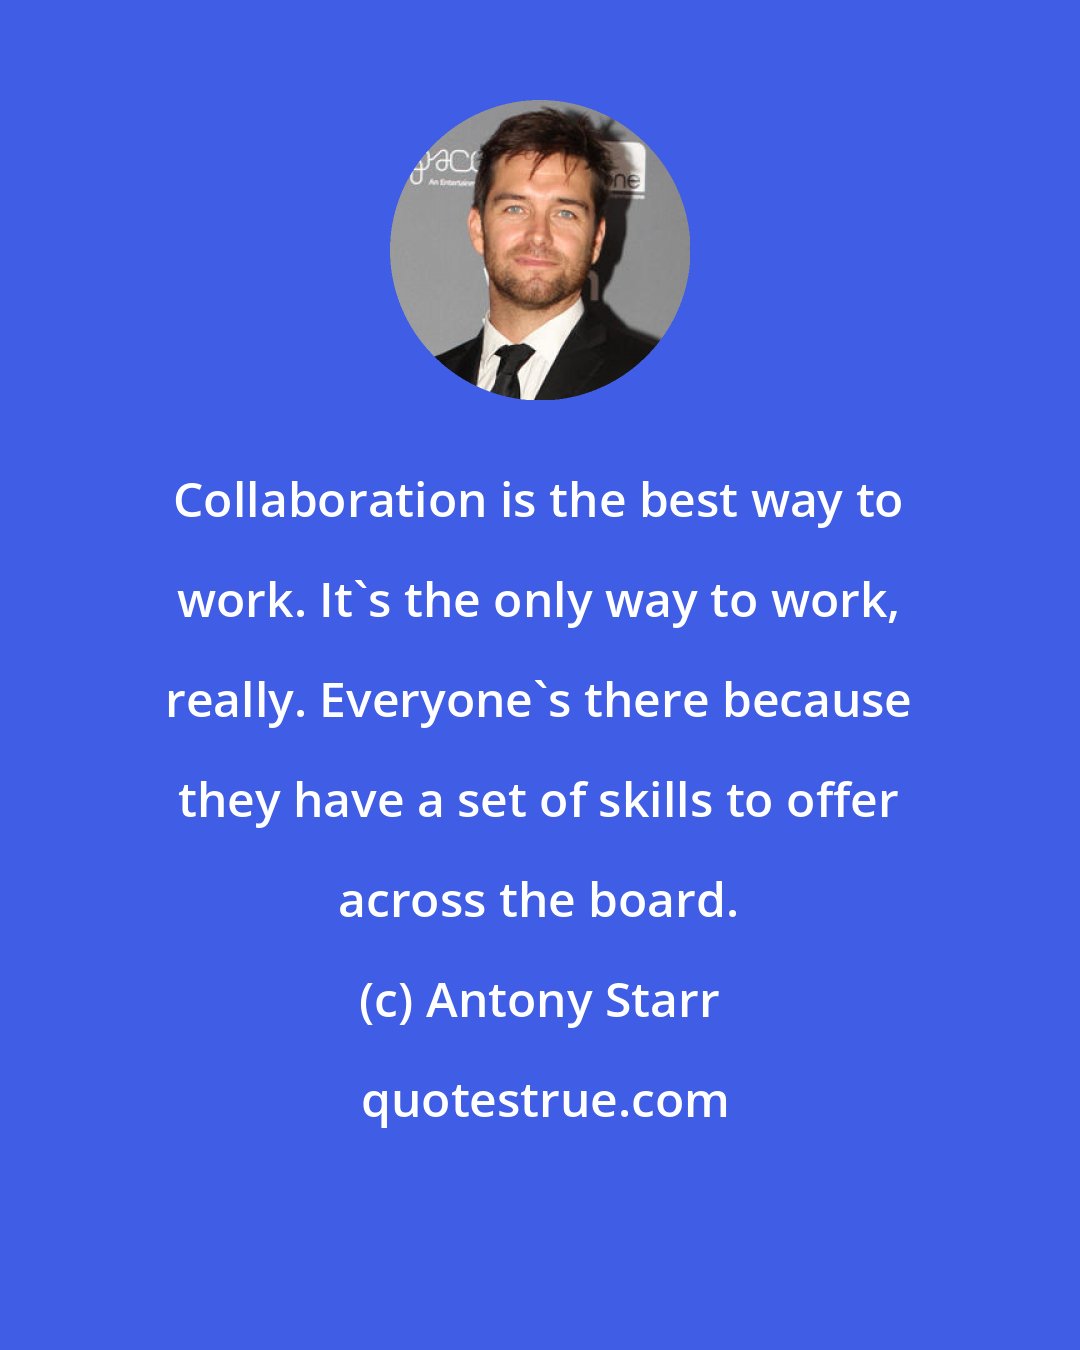 Antony Starr: Collaboration is the best way to work. It's the only way to work, really. Everyone's there because they have a set of skills to offer across the board.